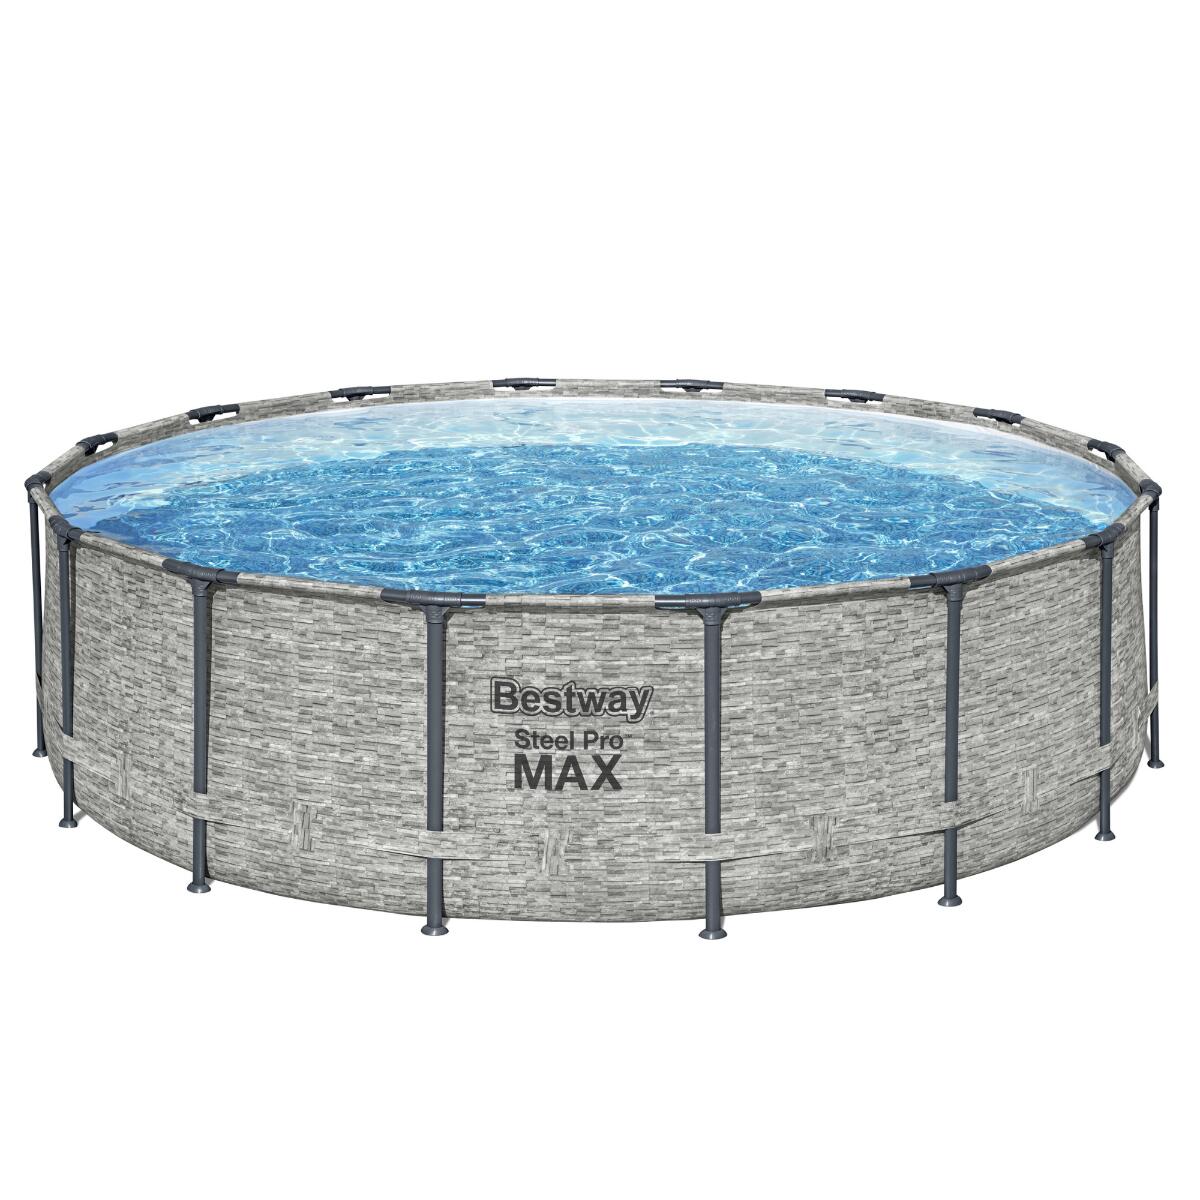 Bestway 16ft x 48" Steel Pro MAX Round Above Ground Swimming Pool 1/7